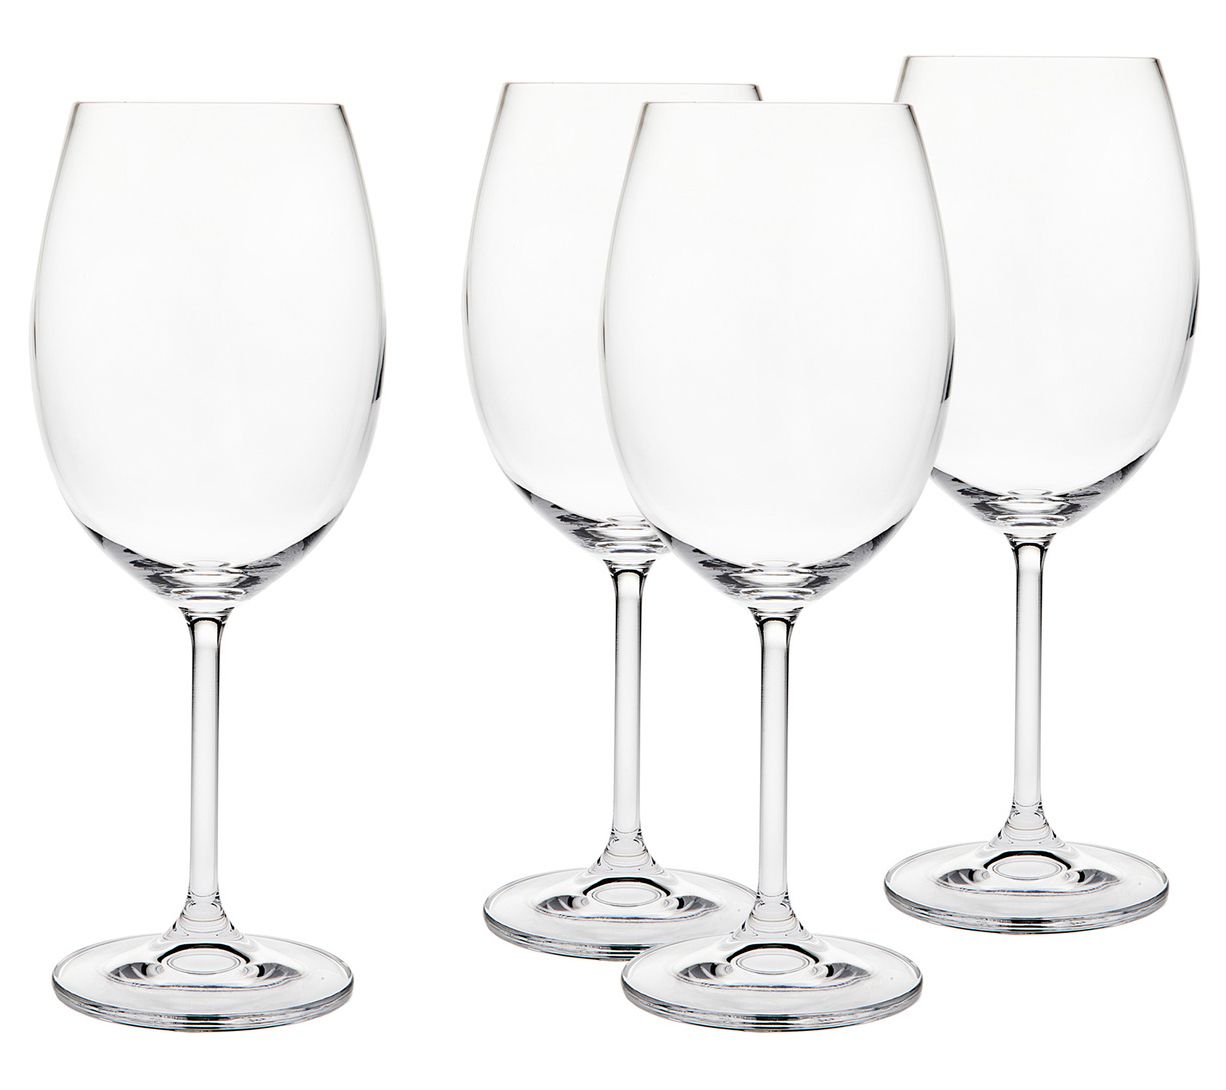 Libbey 13.5oz Red Wine Glasses (Set of 4) | Classic